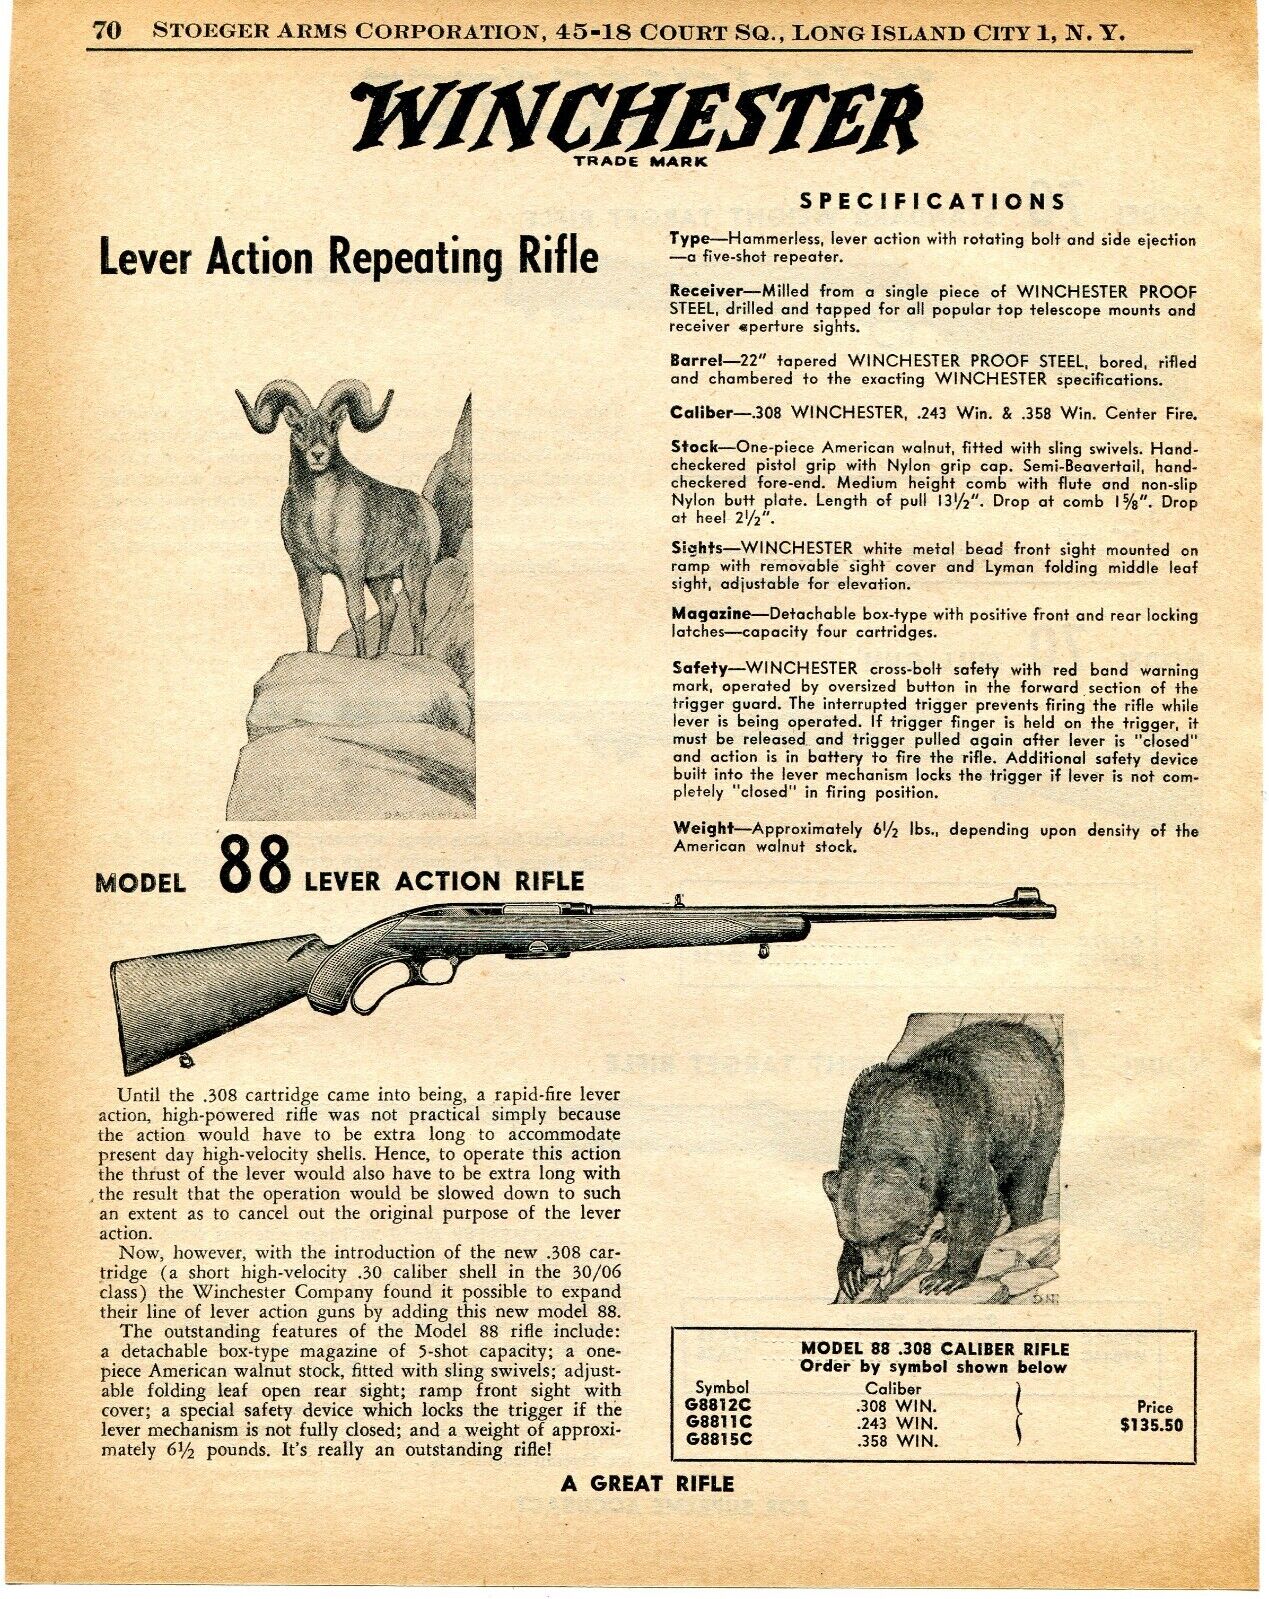 1958 Print Ad of Winchester Model 88 Lever Action Rifle